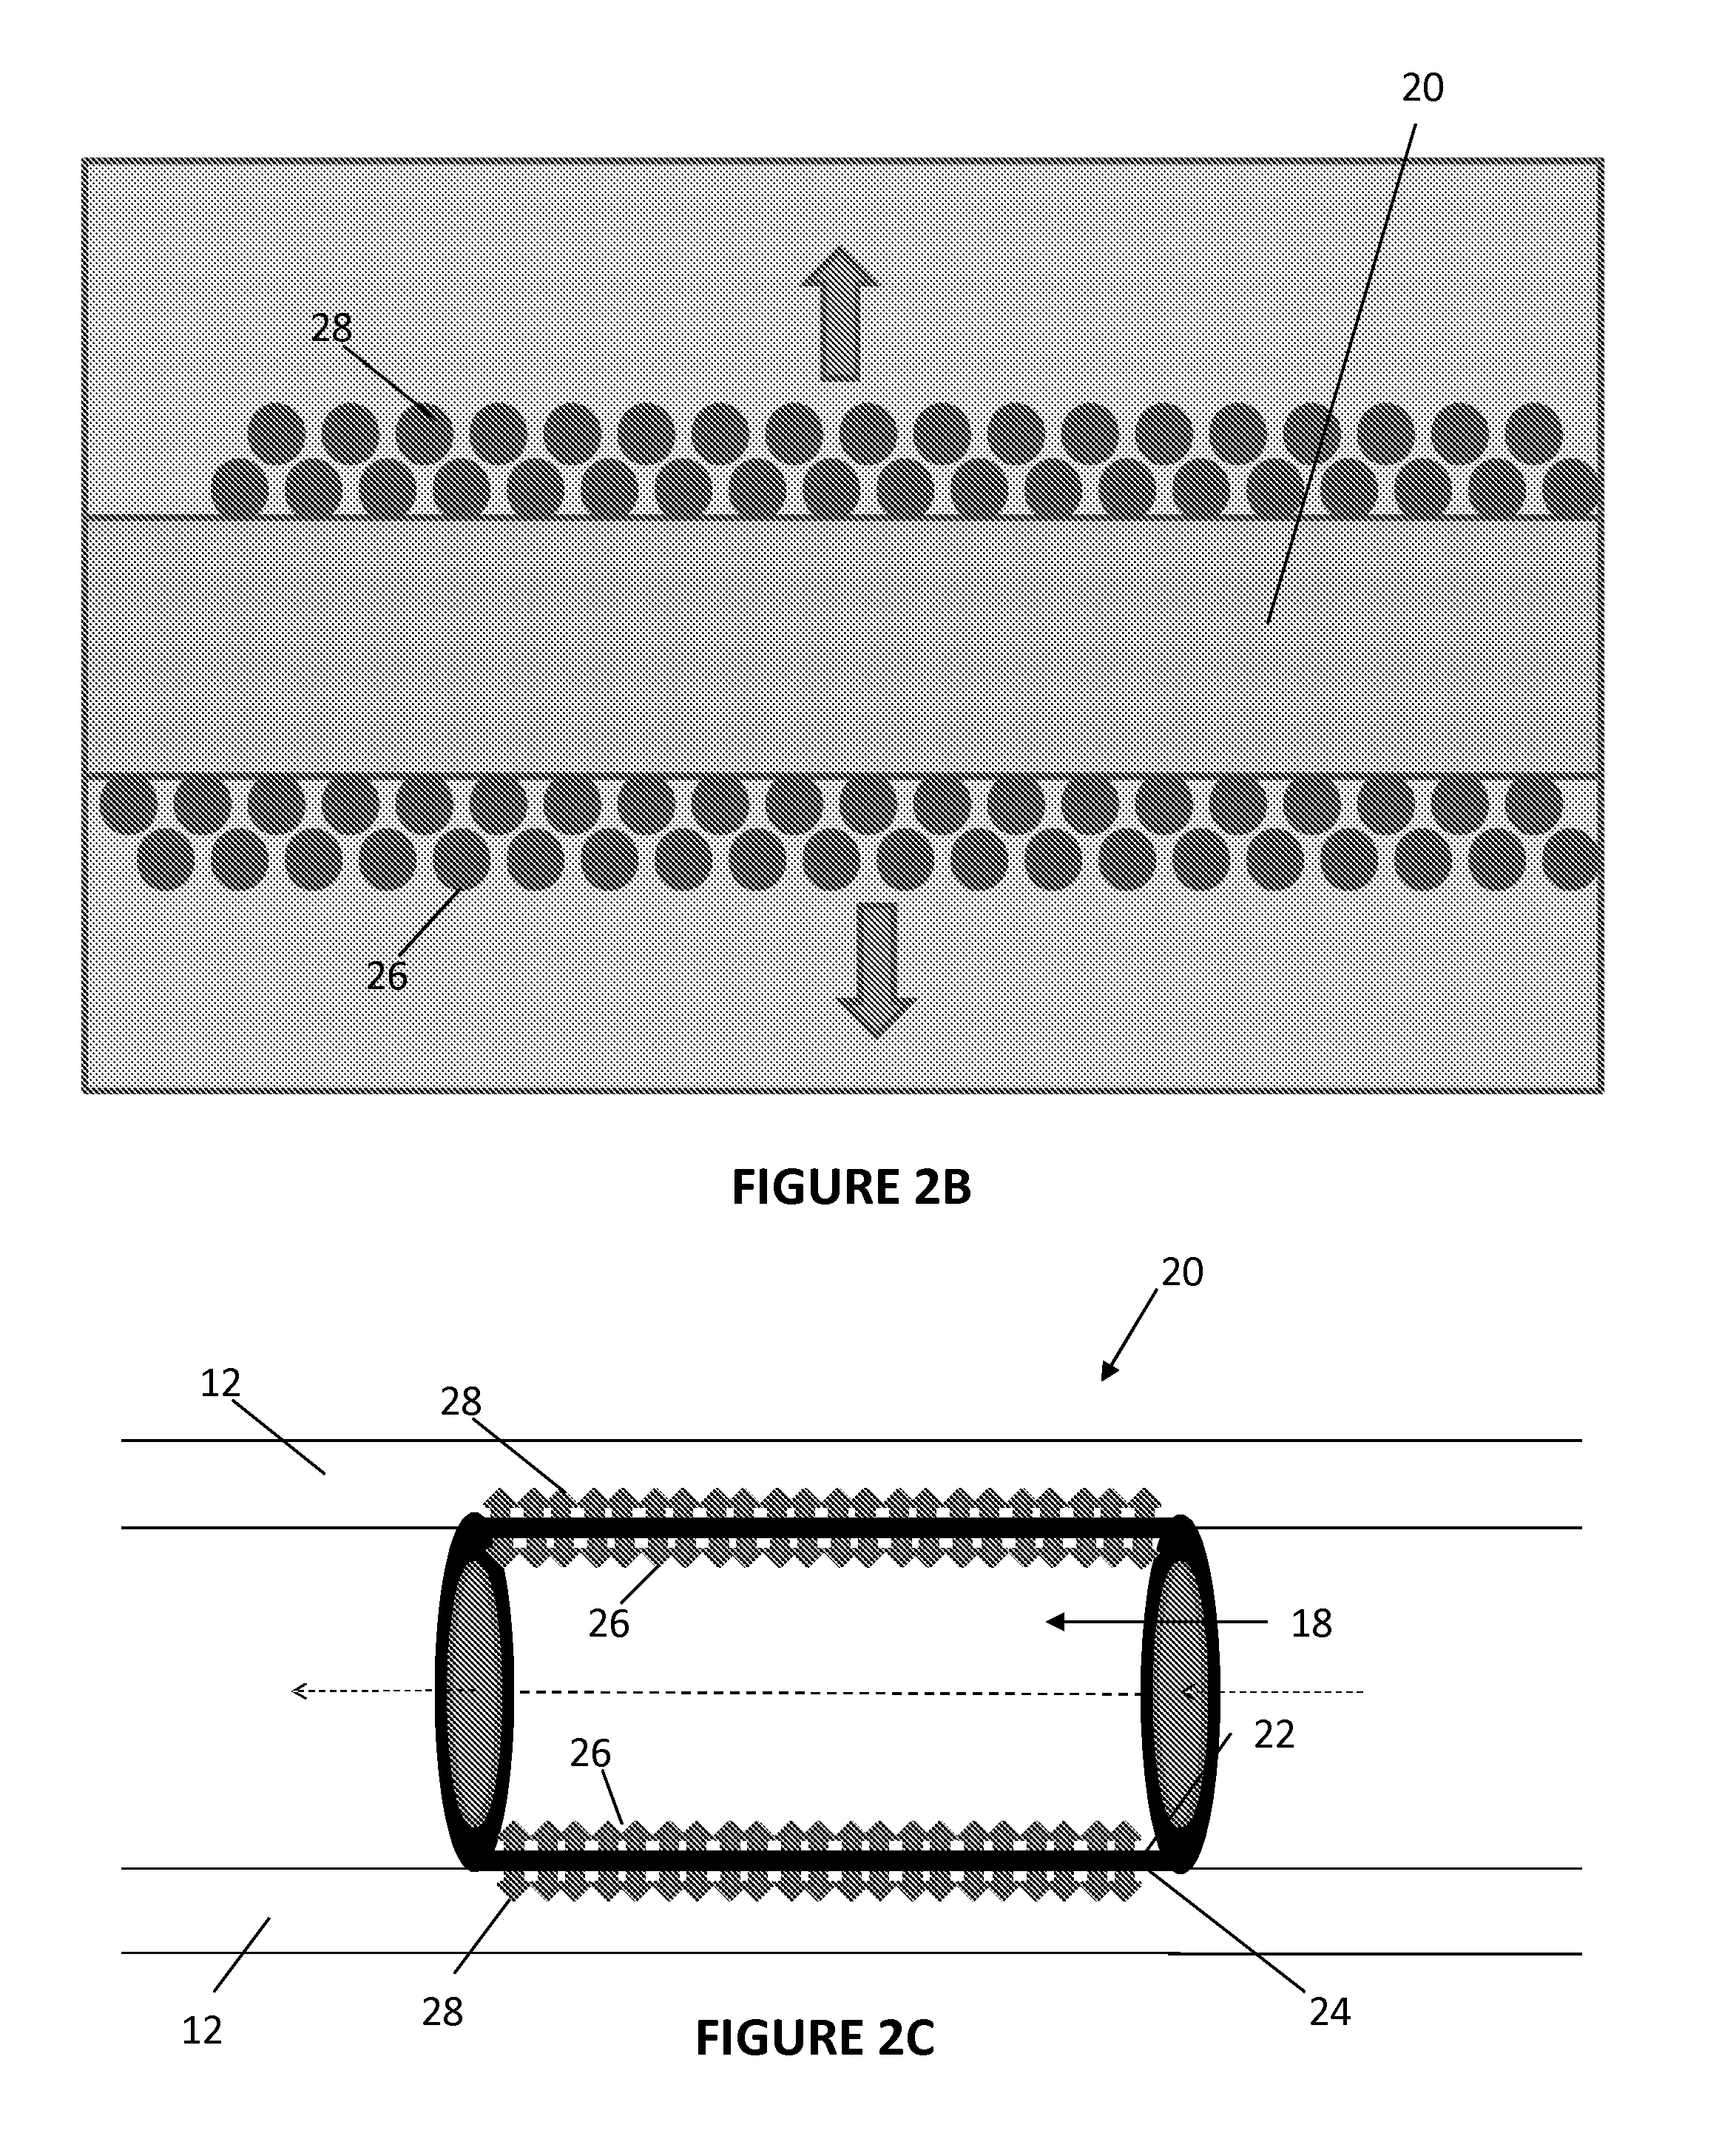 Methods, Systems, and Devices Relating to Directional Eluting Implantable Medical Devices